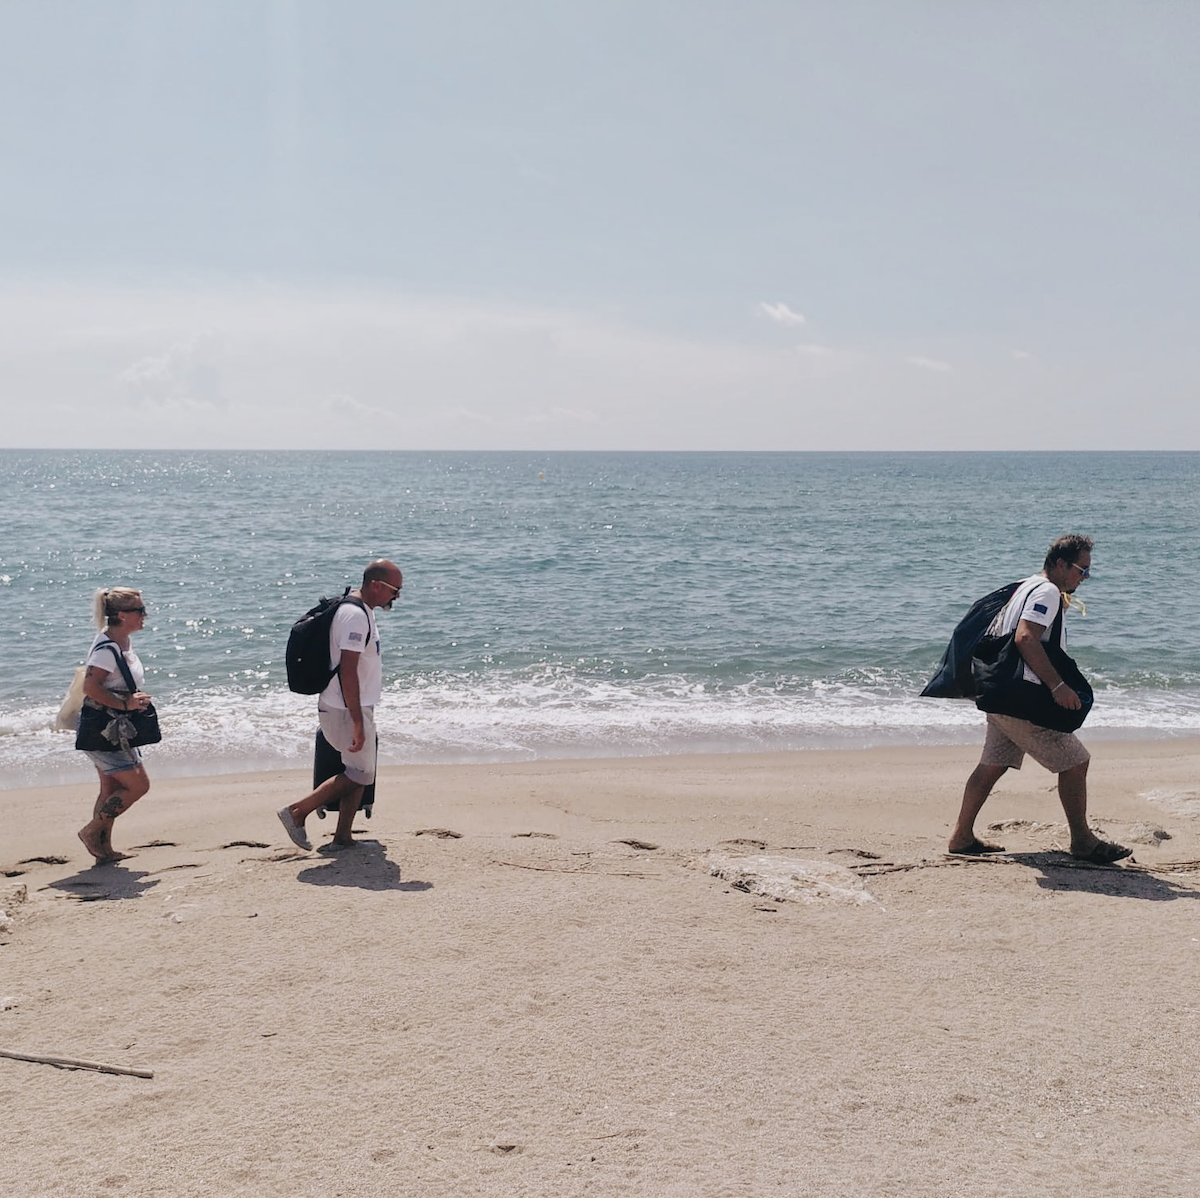 vlpf carrying out marine litter monitoring on the beach in barcelona